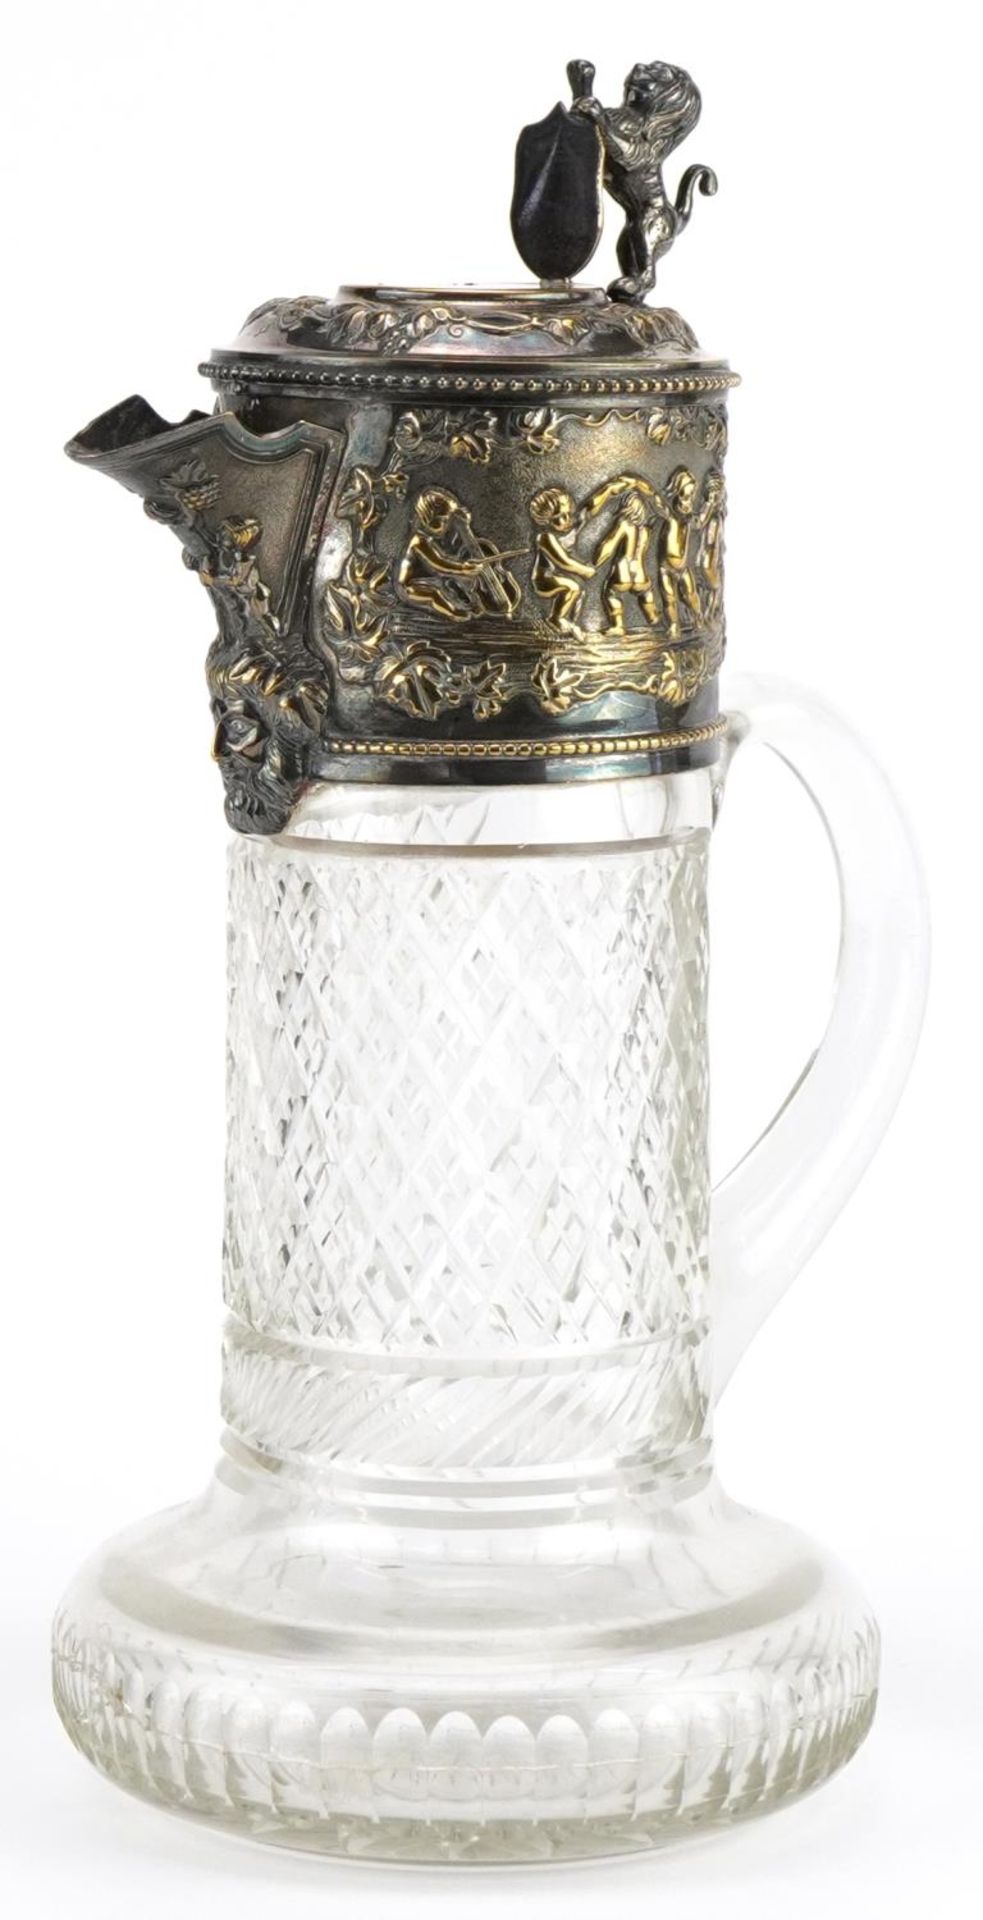 19th century cut glass claret jug with silver plated mounts embossed with a Bacchanalian scene